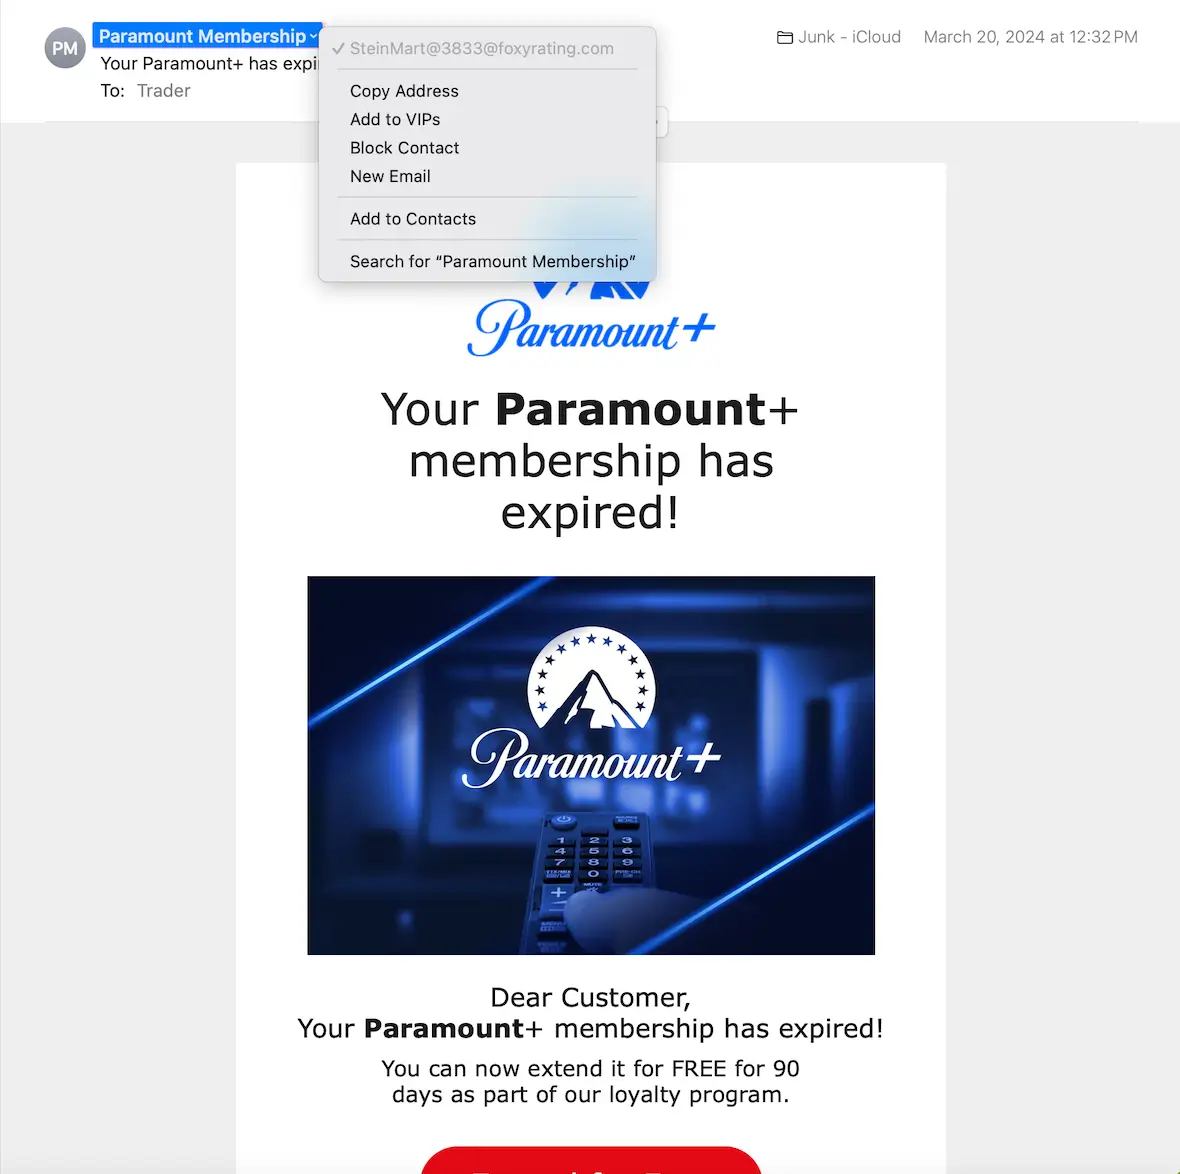 A screenshot showing an example of a fraudulent email sent from a scammer.